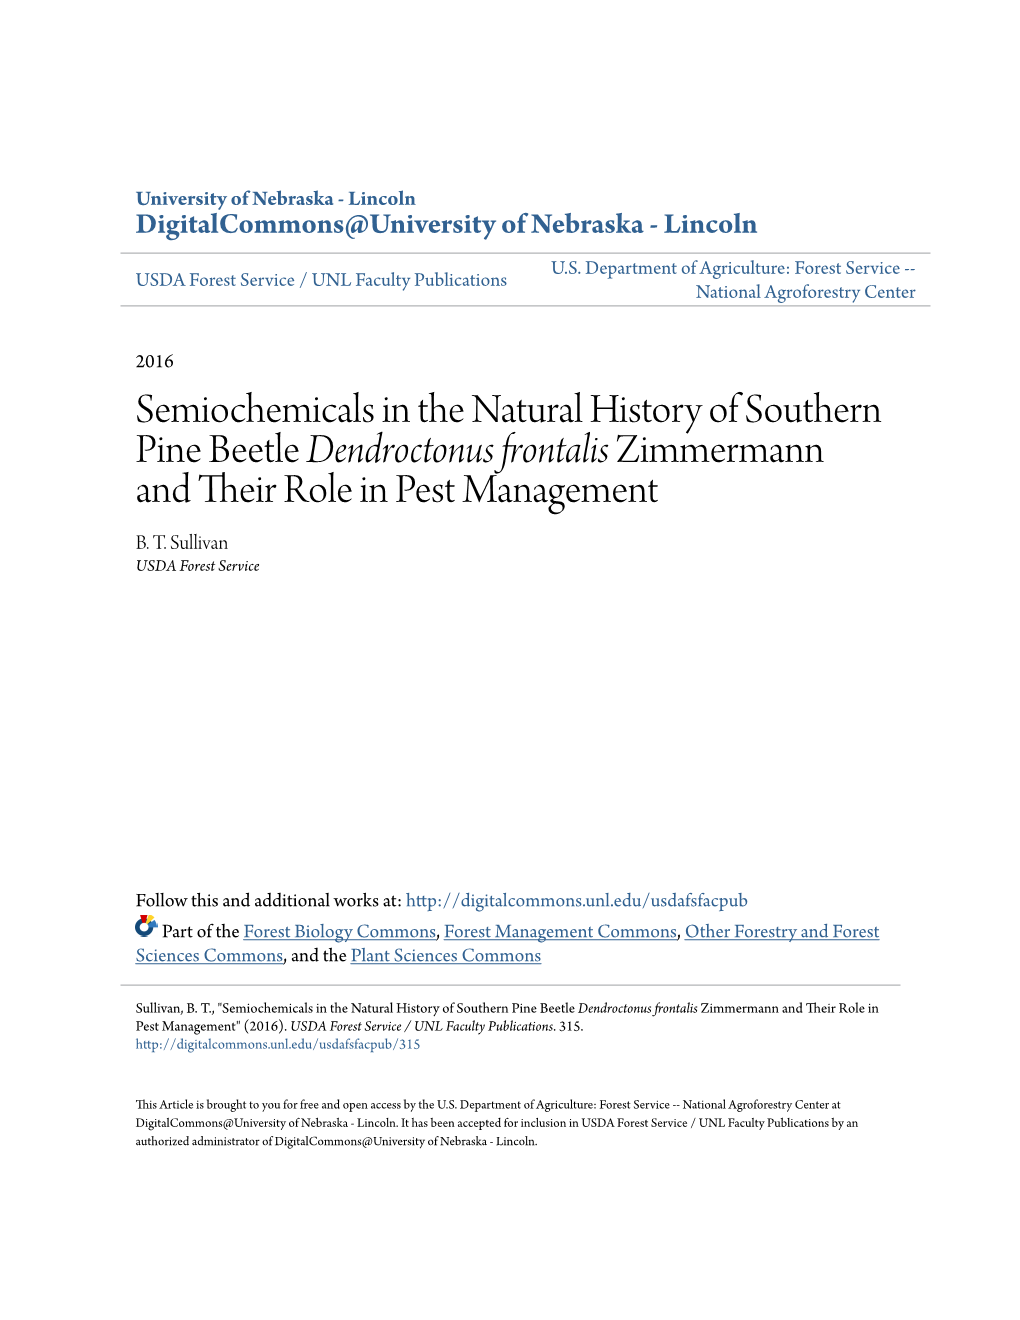 Semiochemicals in the Natural History of Southern Pine Beetle Dendroctonus Frontalis Zimmermann and Their Role in Pest Management B